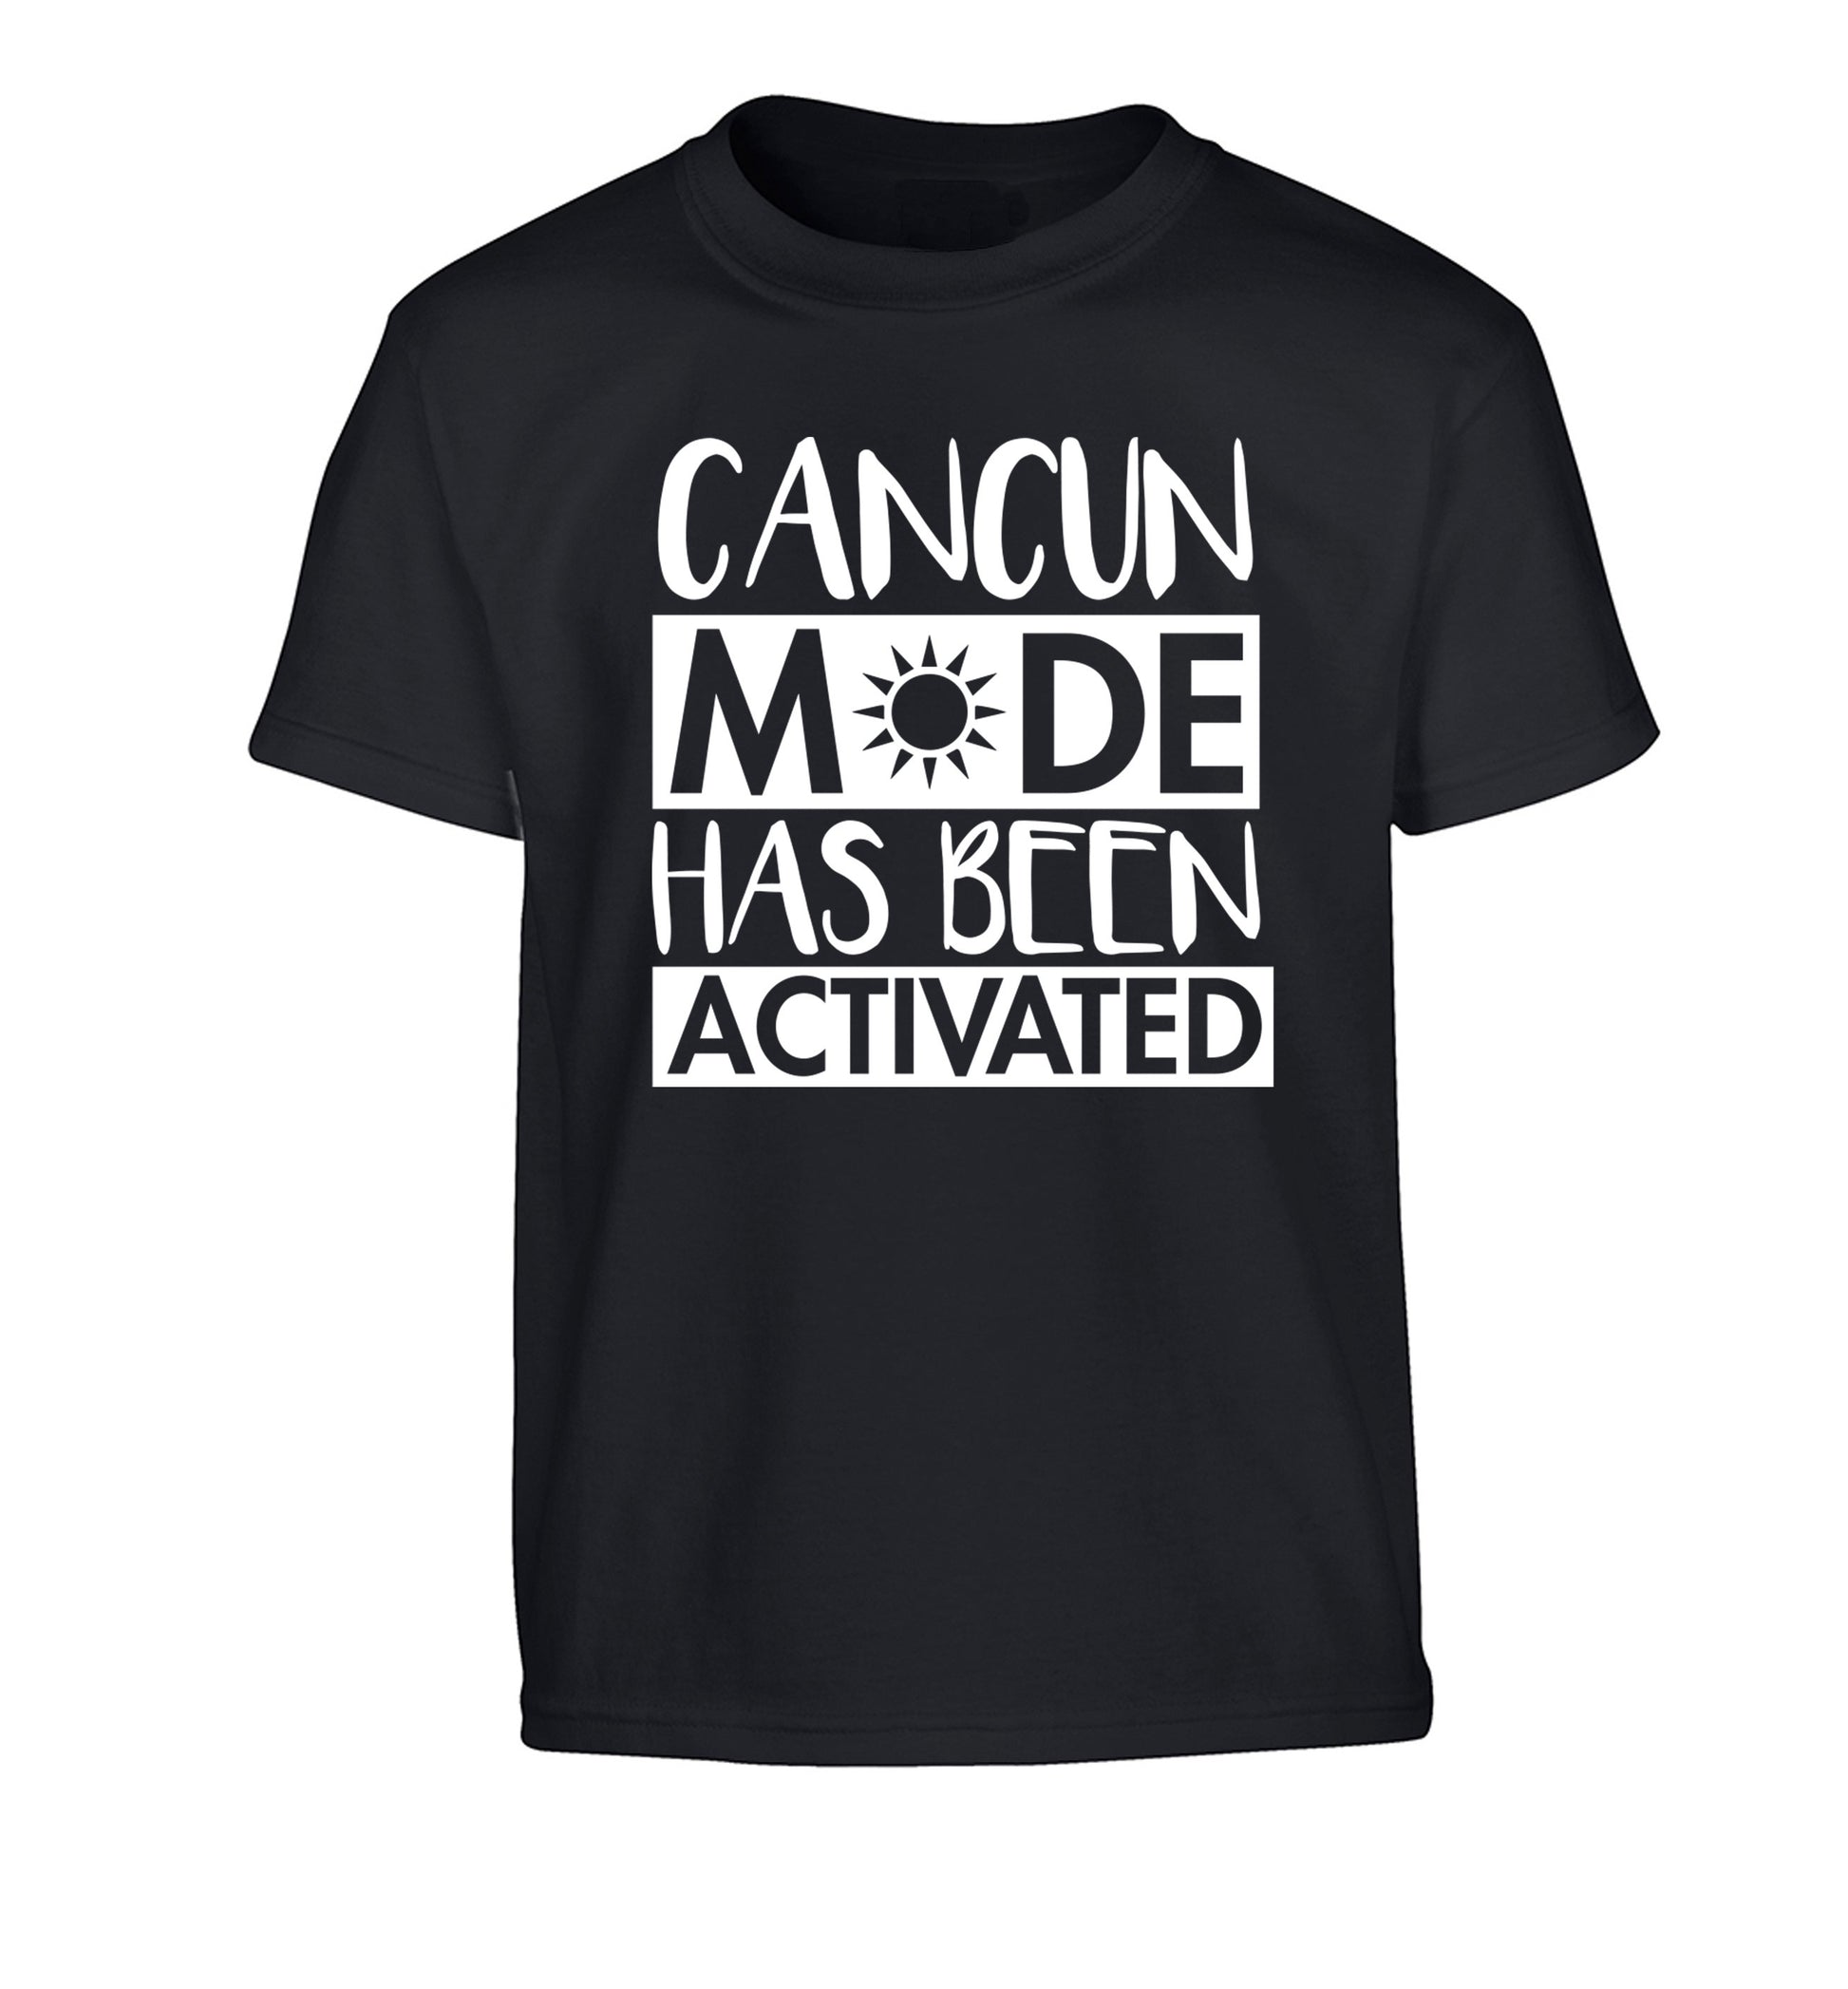 Cancun mode has been activated Children's black Tshirt 12-14 Years